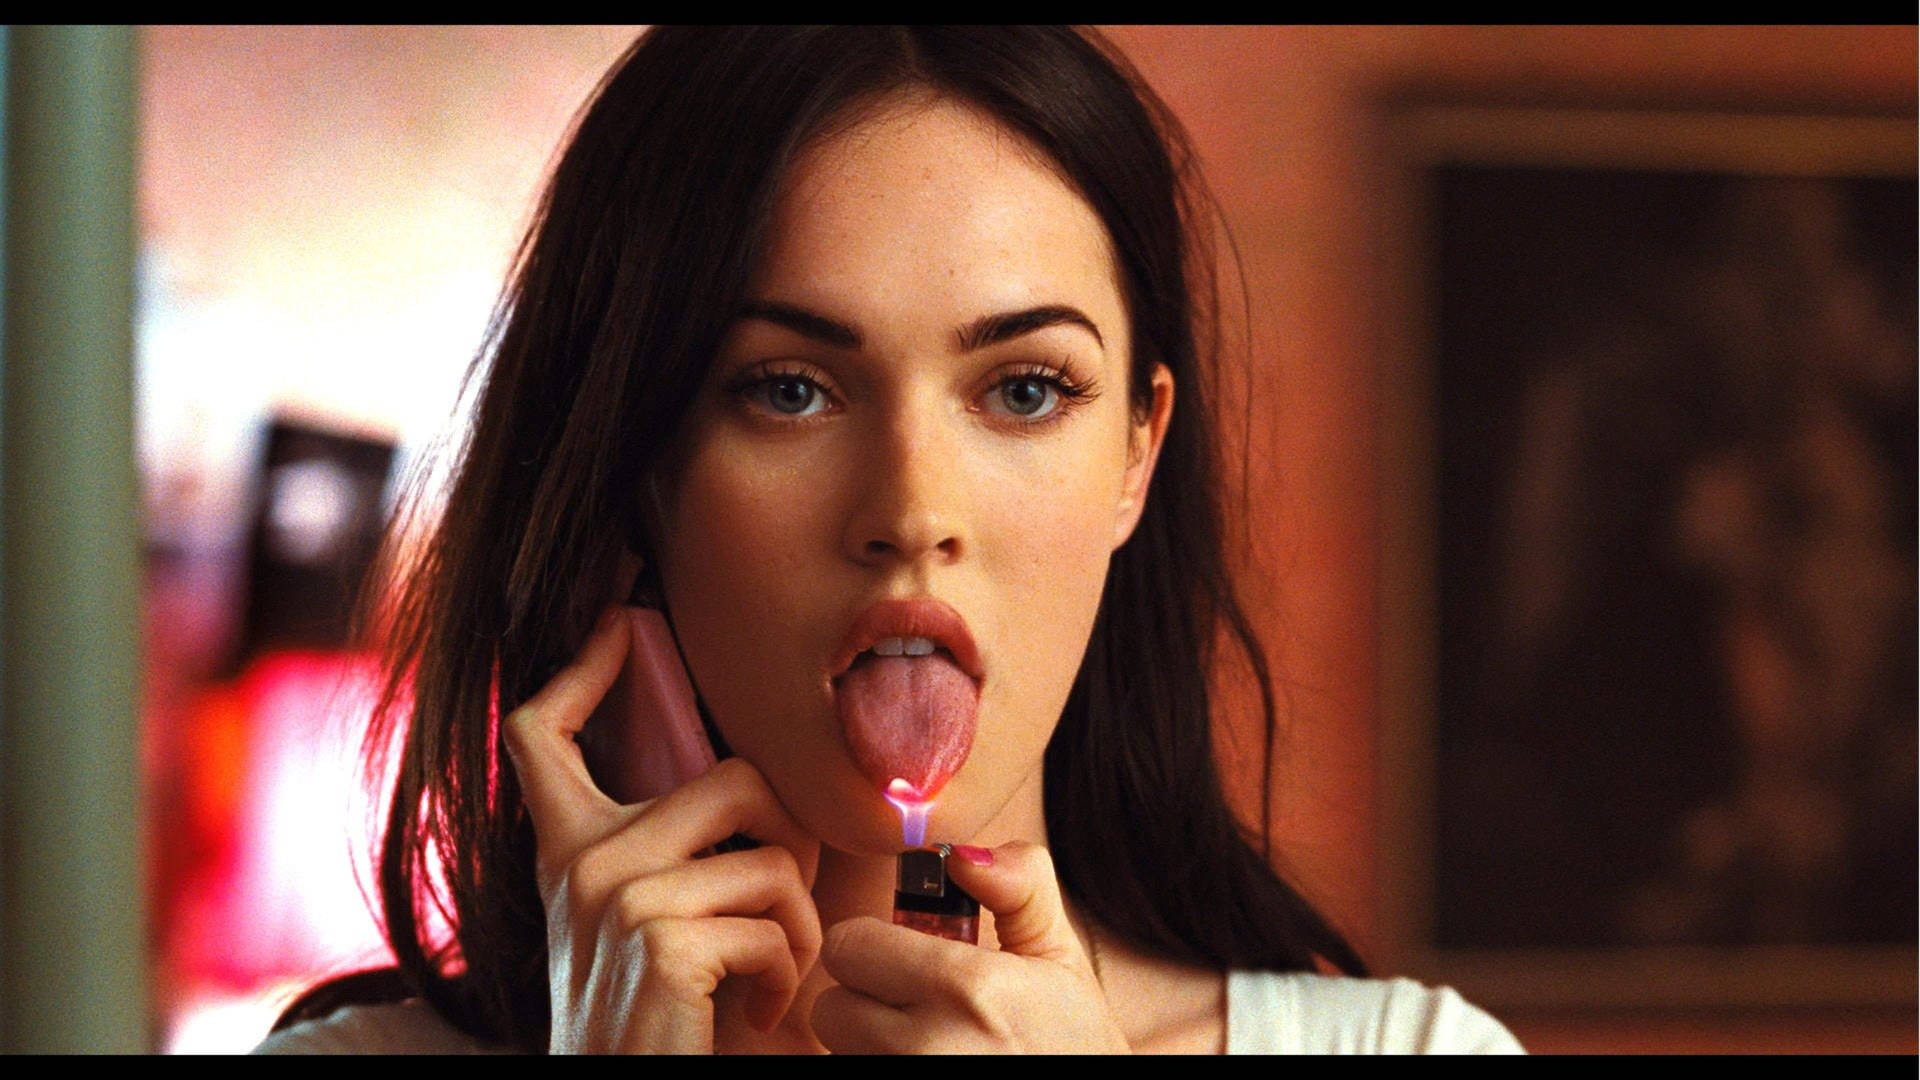 Megan Fox Sticks Out Her Tongue In A Sultry Pose.